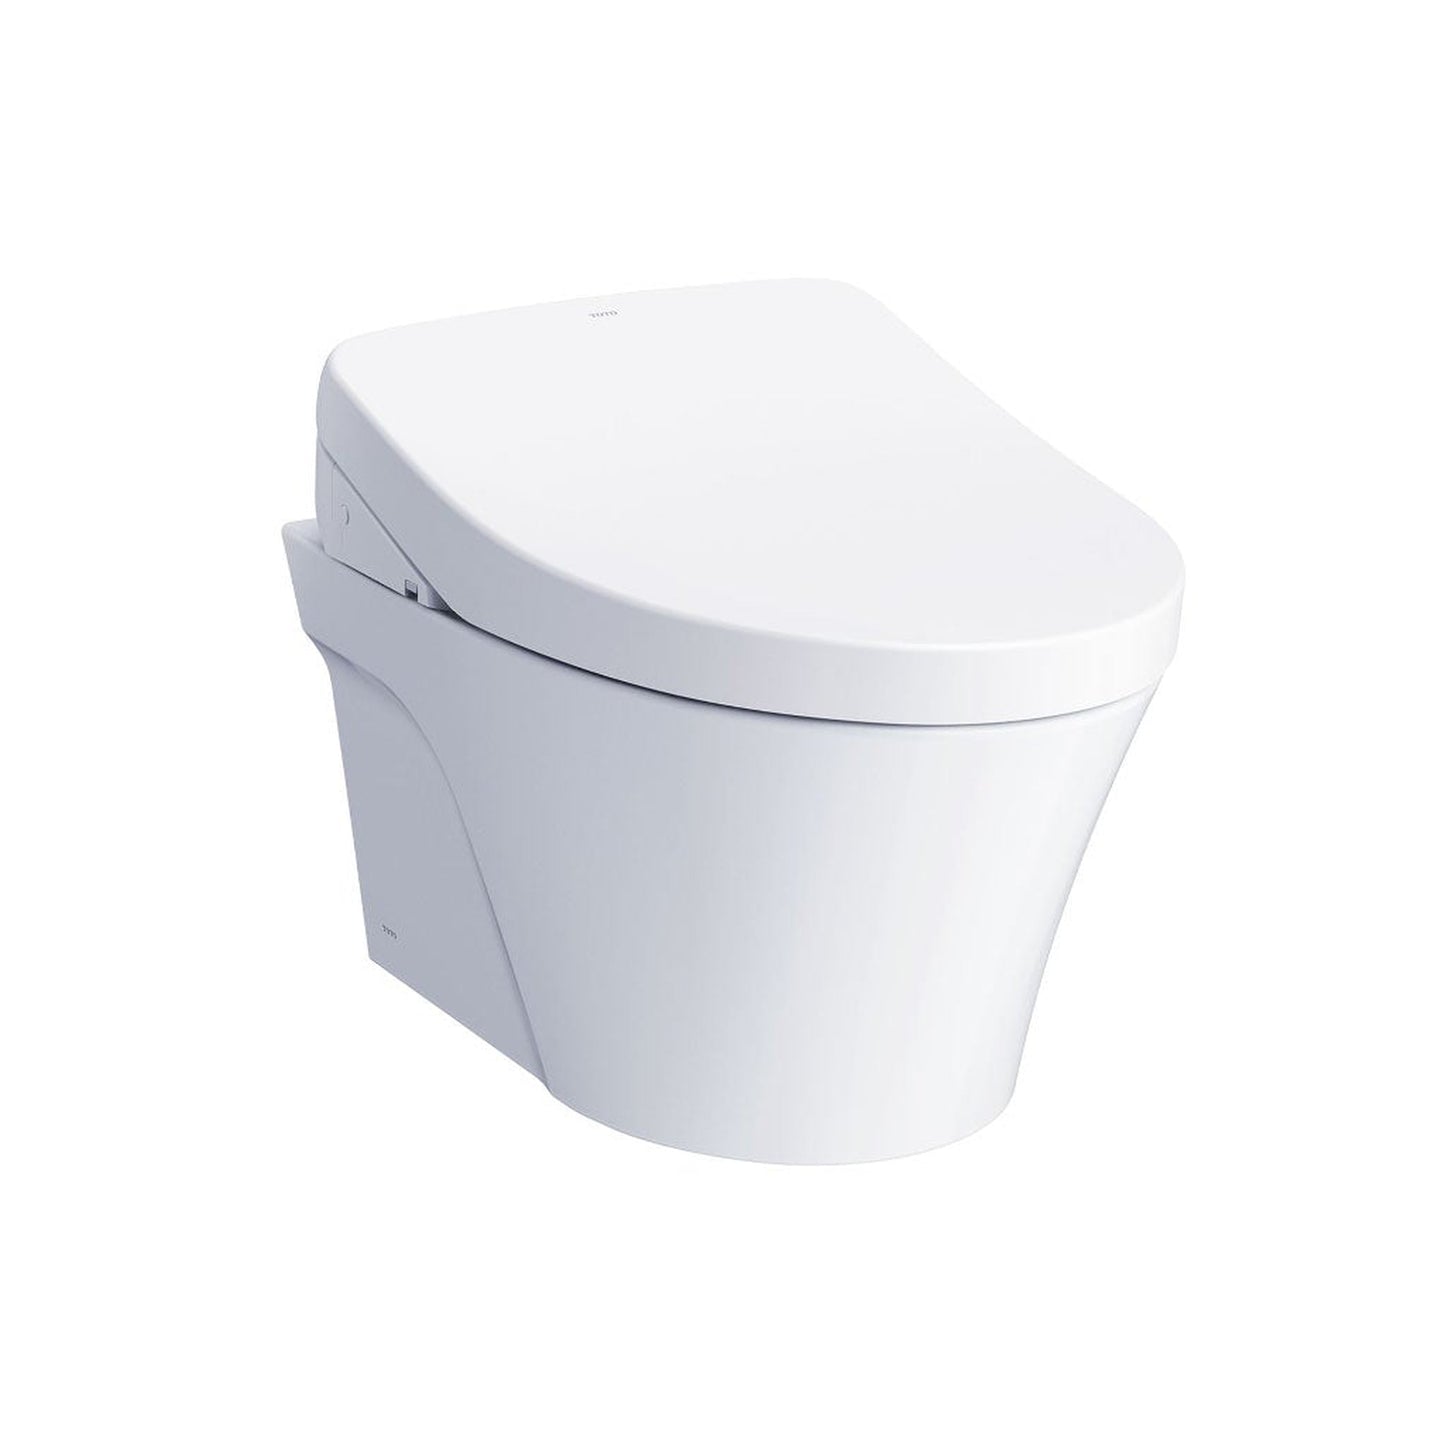 TOTO AP White Elongated Wall-Mounted 1.28 GPF & 0.9 GPF Dual-Flush Toilet With Washlet+ S550E and Matte Silver Push Plate